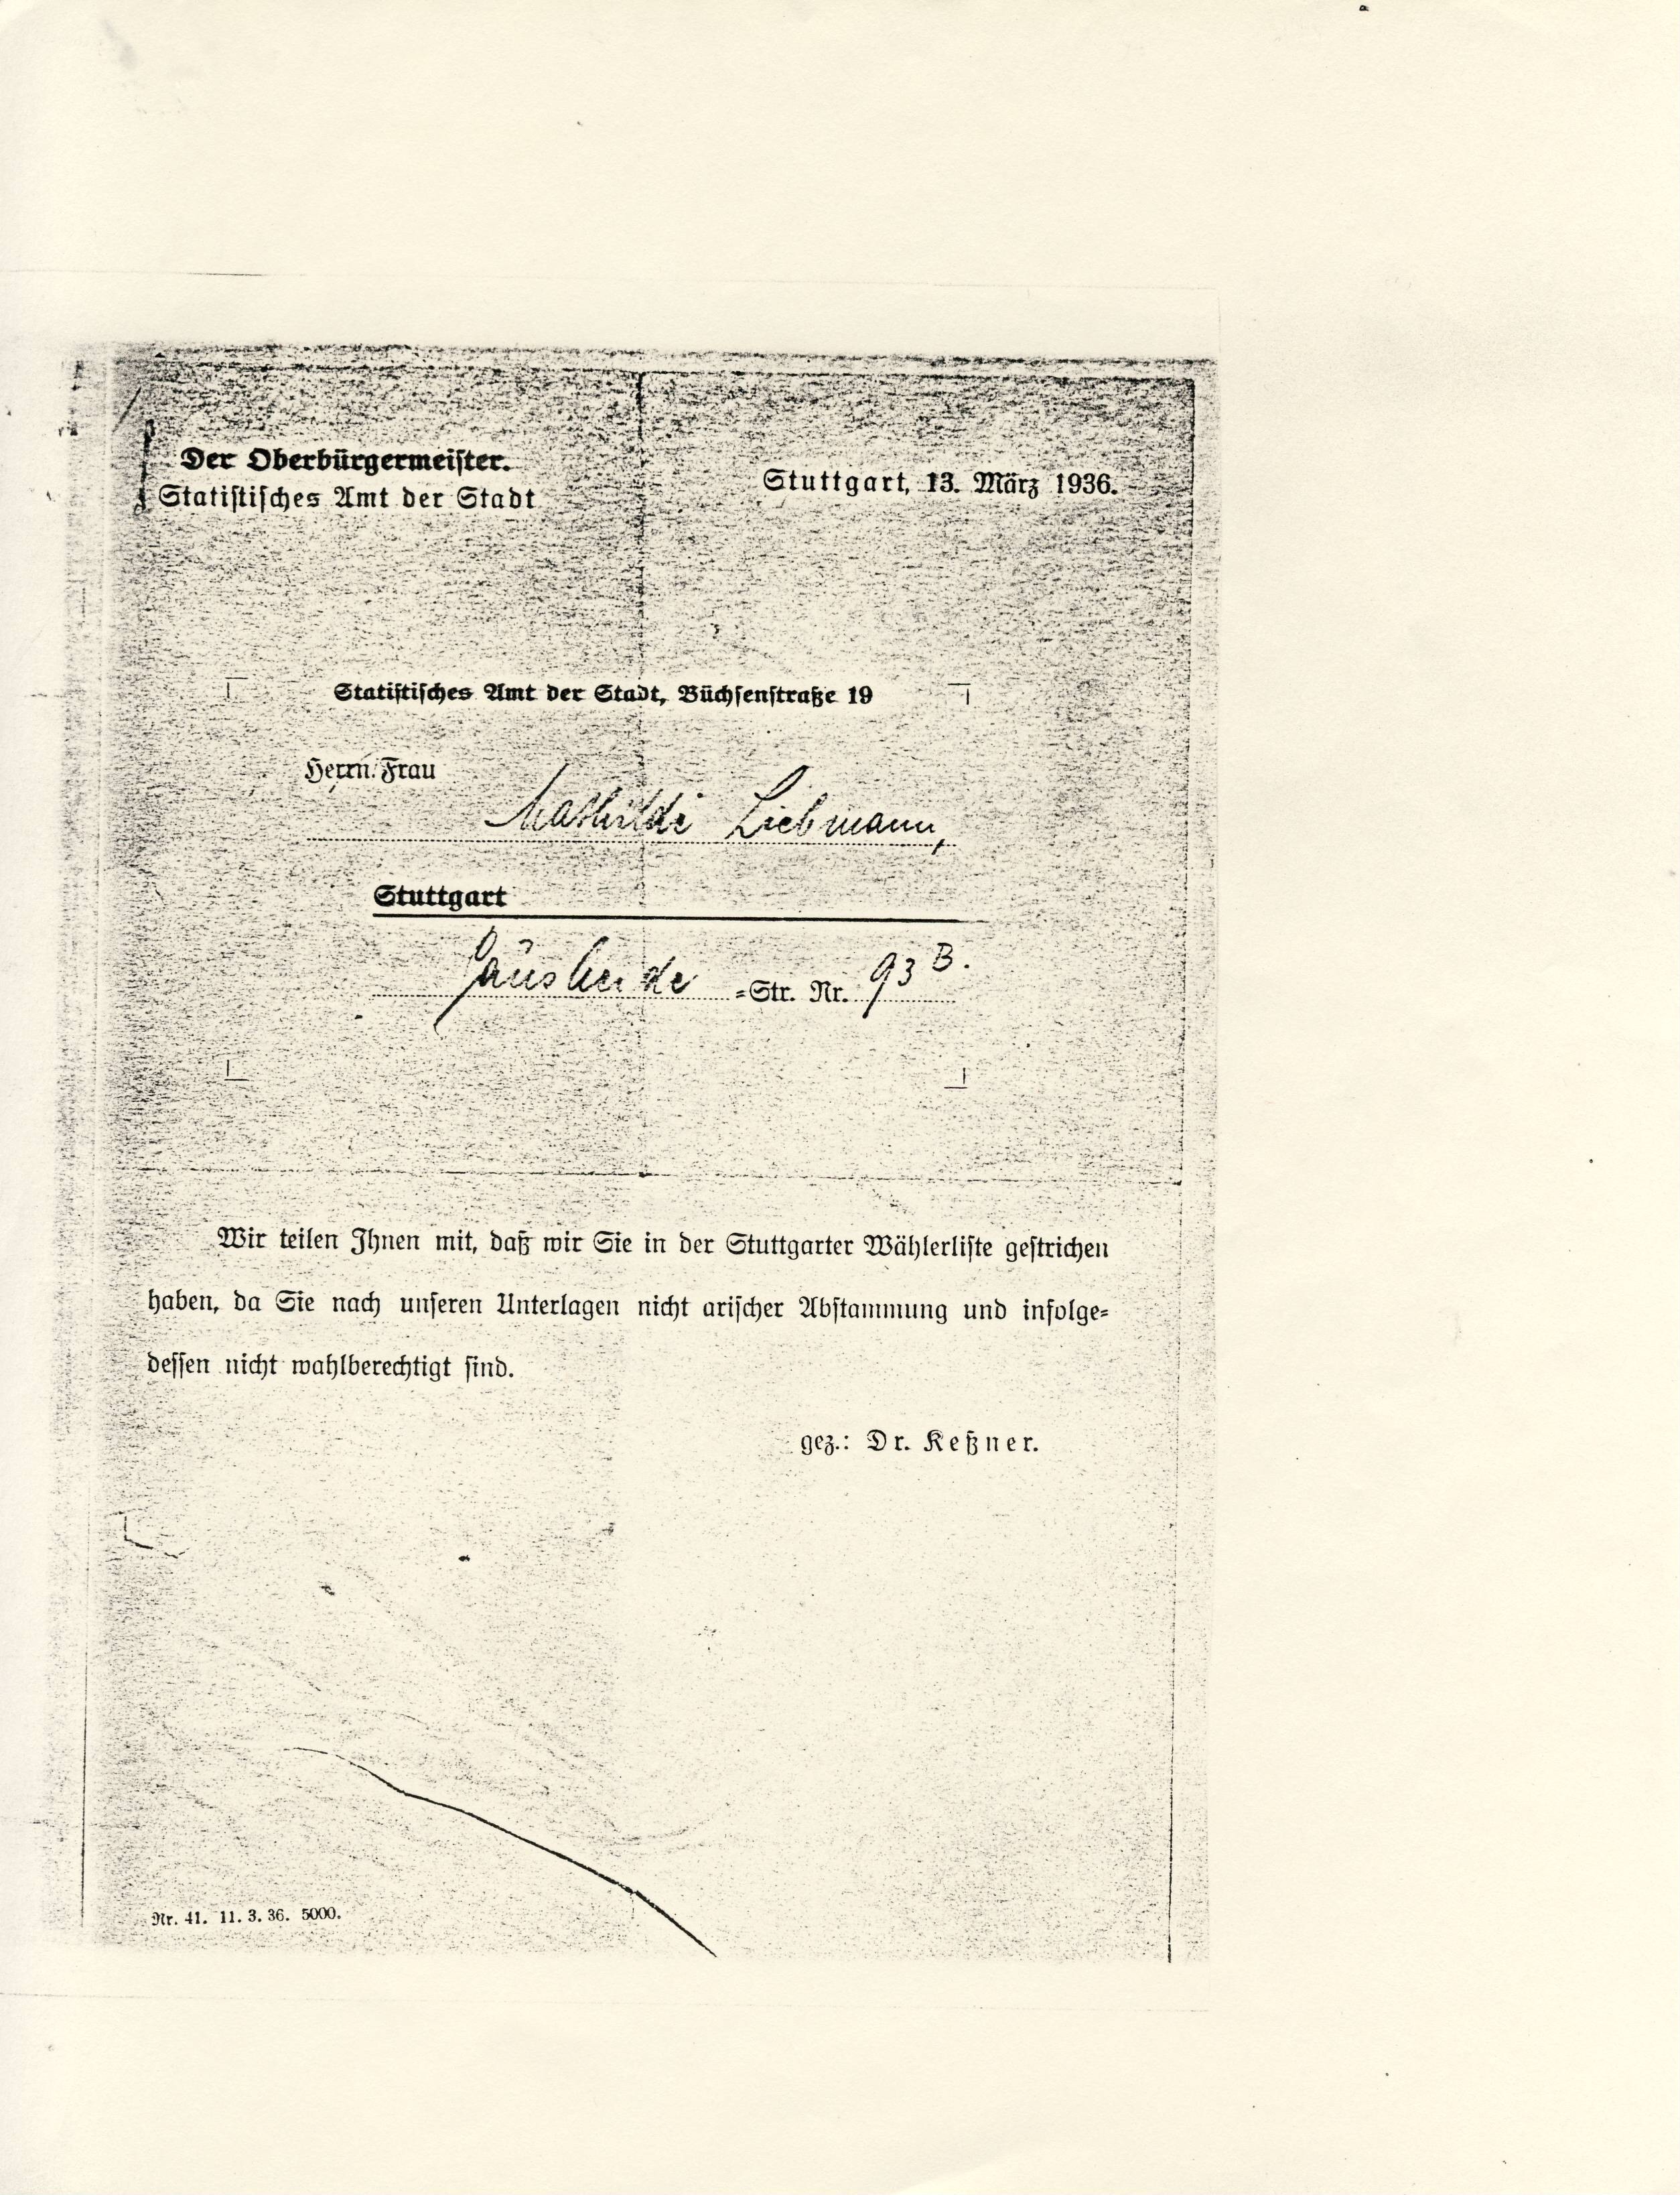 Mathilde Liebmann's letter in German denying her right to vote